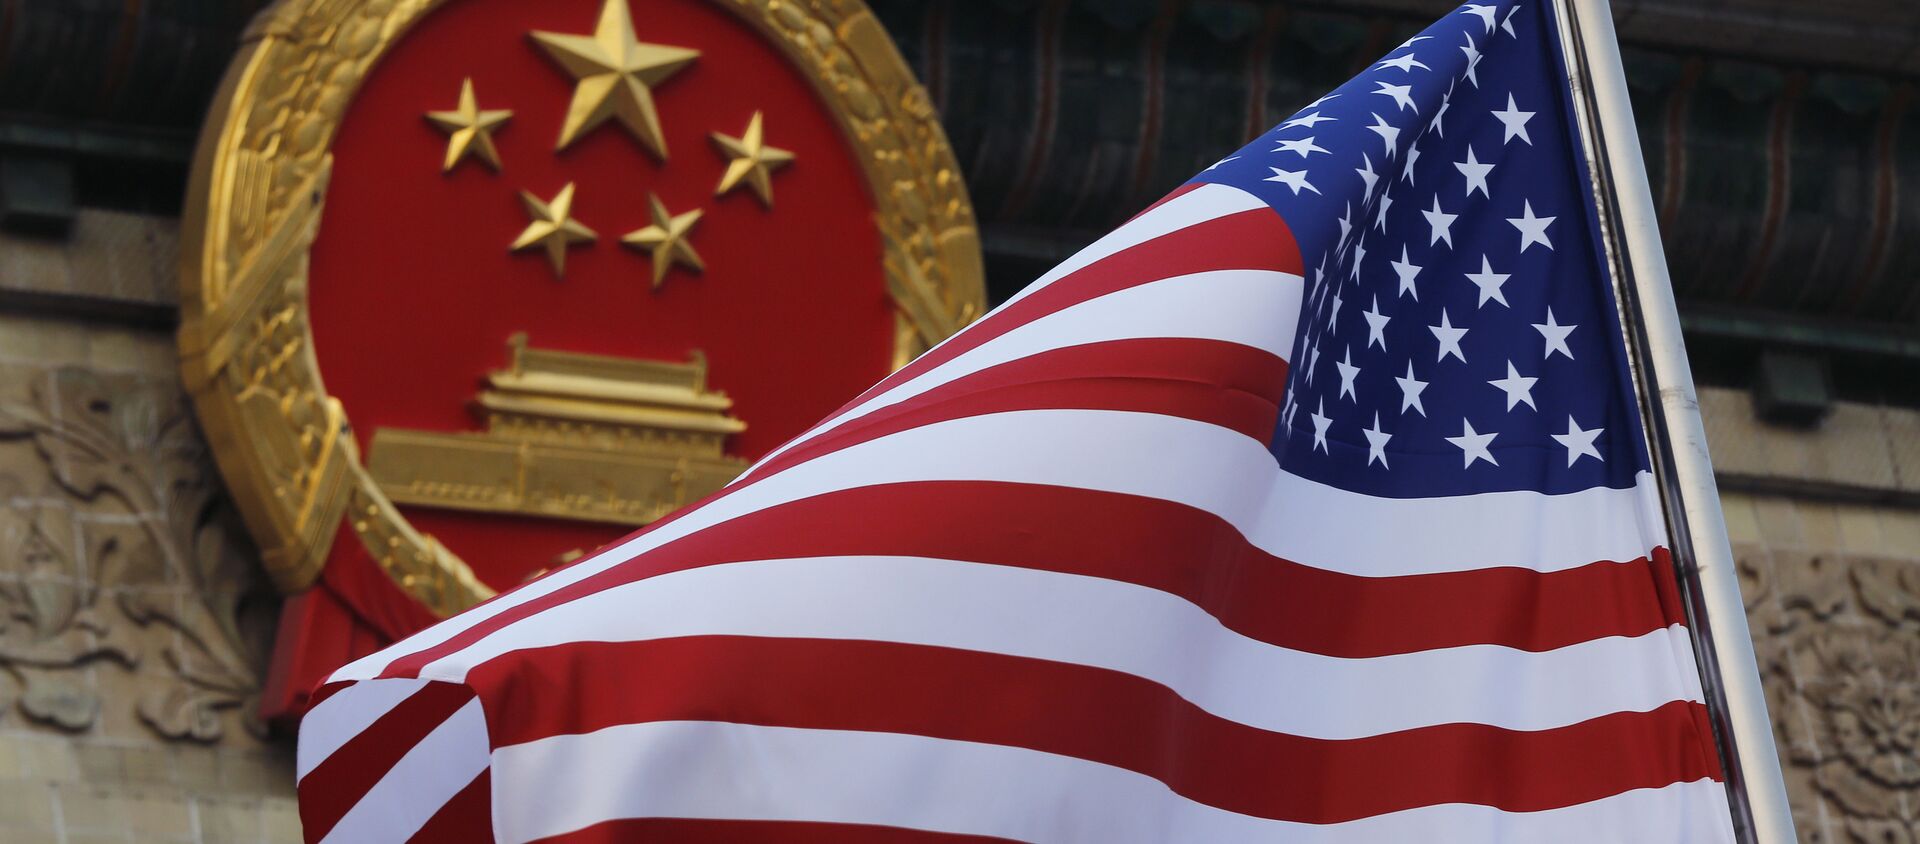 FILE - In this Nov. 9, 2017 file photo, an American flag is flown next to the Chinese national emblem during a welcome ceremony for visiting U.S. President Donald Trump outside the Great Hall of the People in Beijing - Sputnik Moldova-România, 1920, 14.06.2021